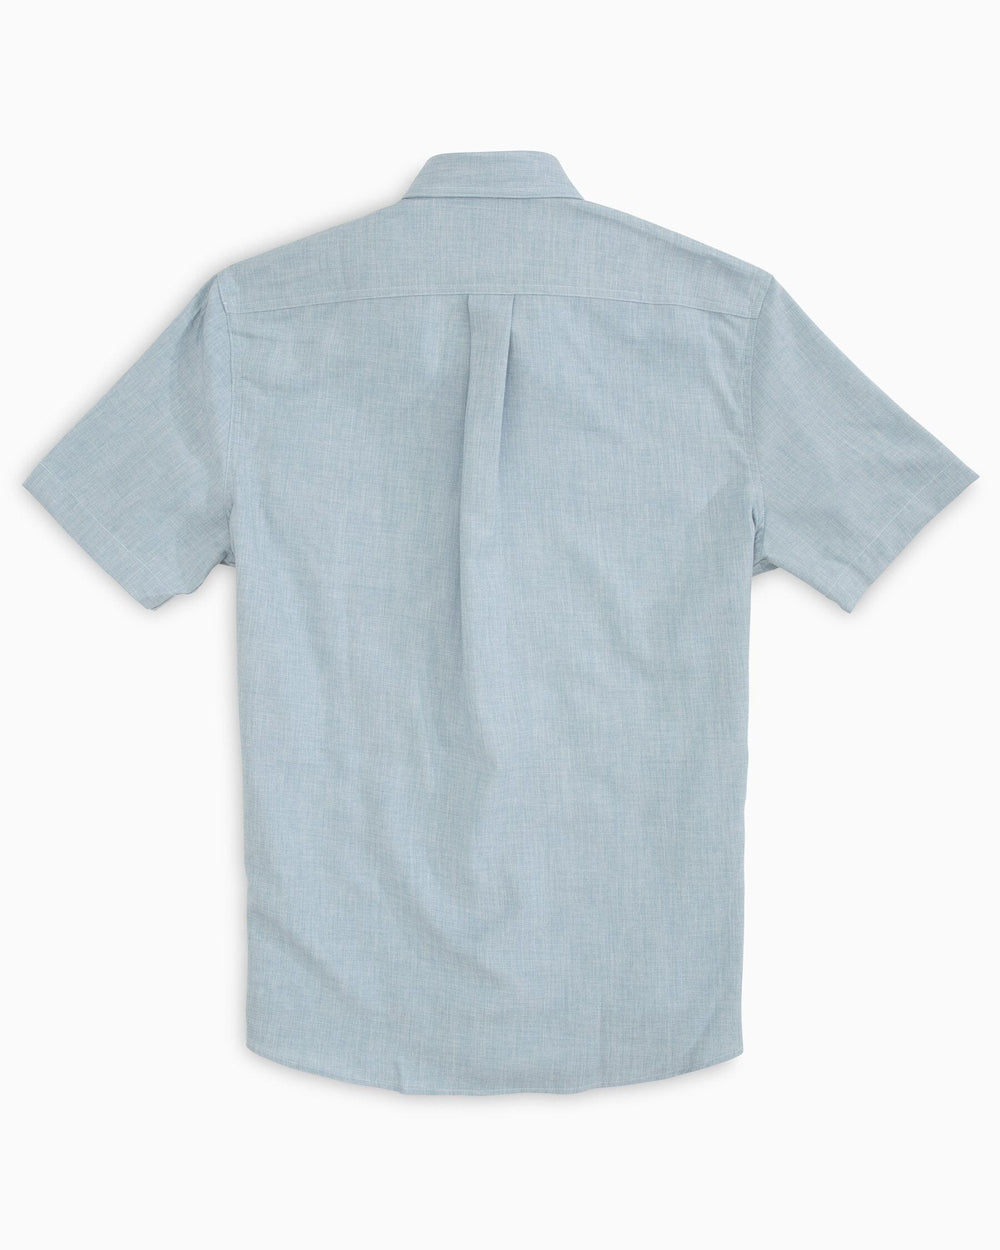 The back view of the Virginia Tech Hokies Short Sleeve Button Down Dock Shirt by Southern Tide - Seagull Grey